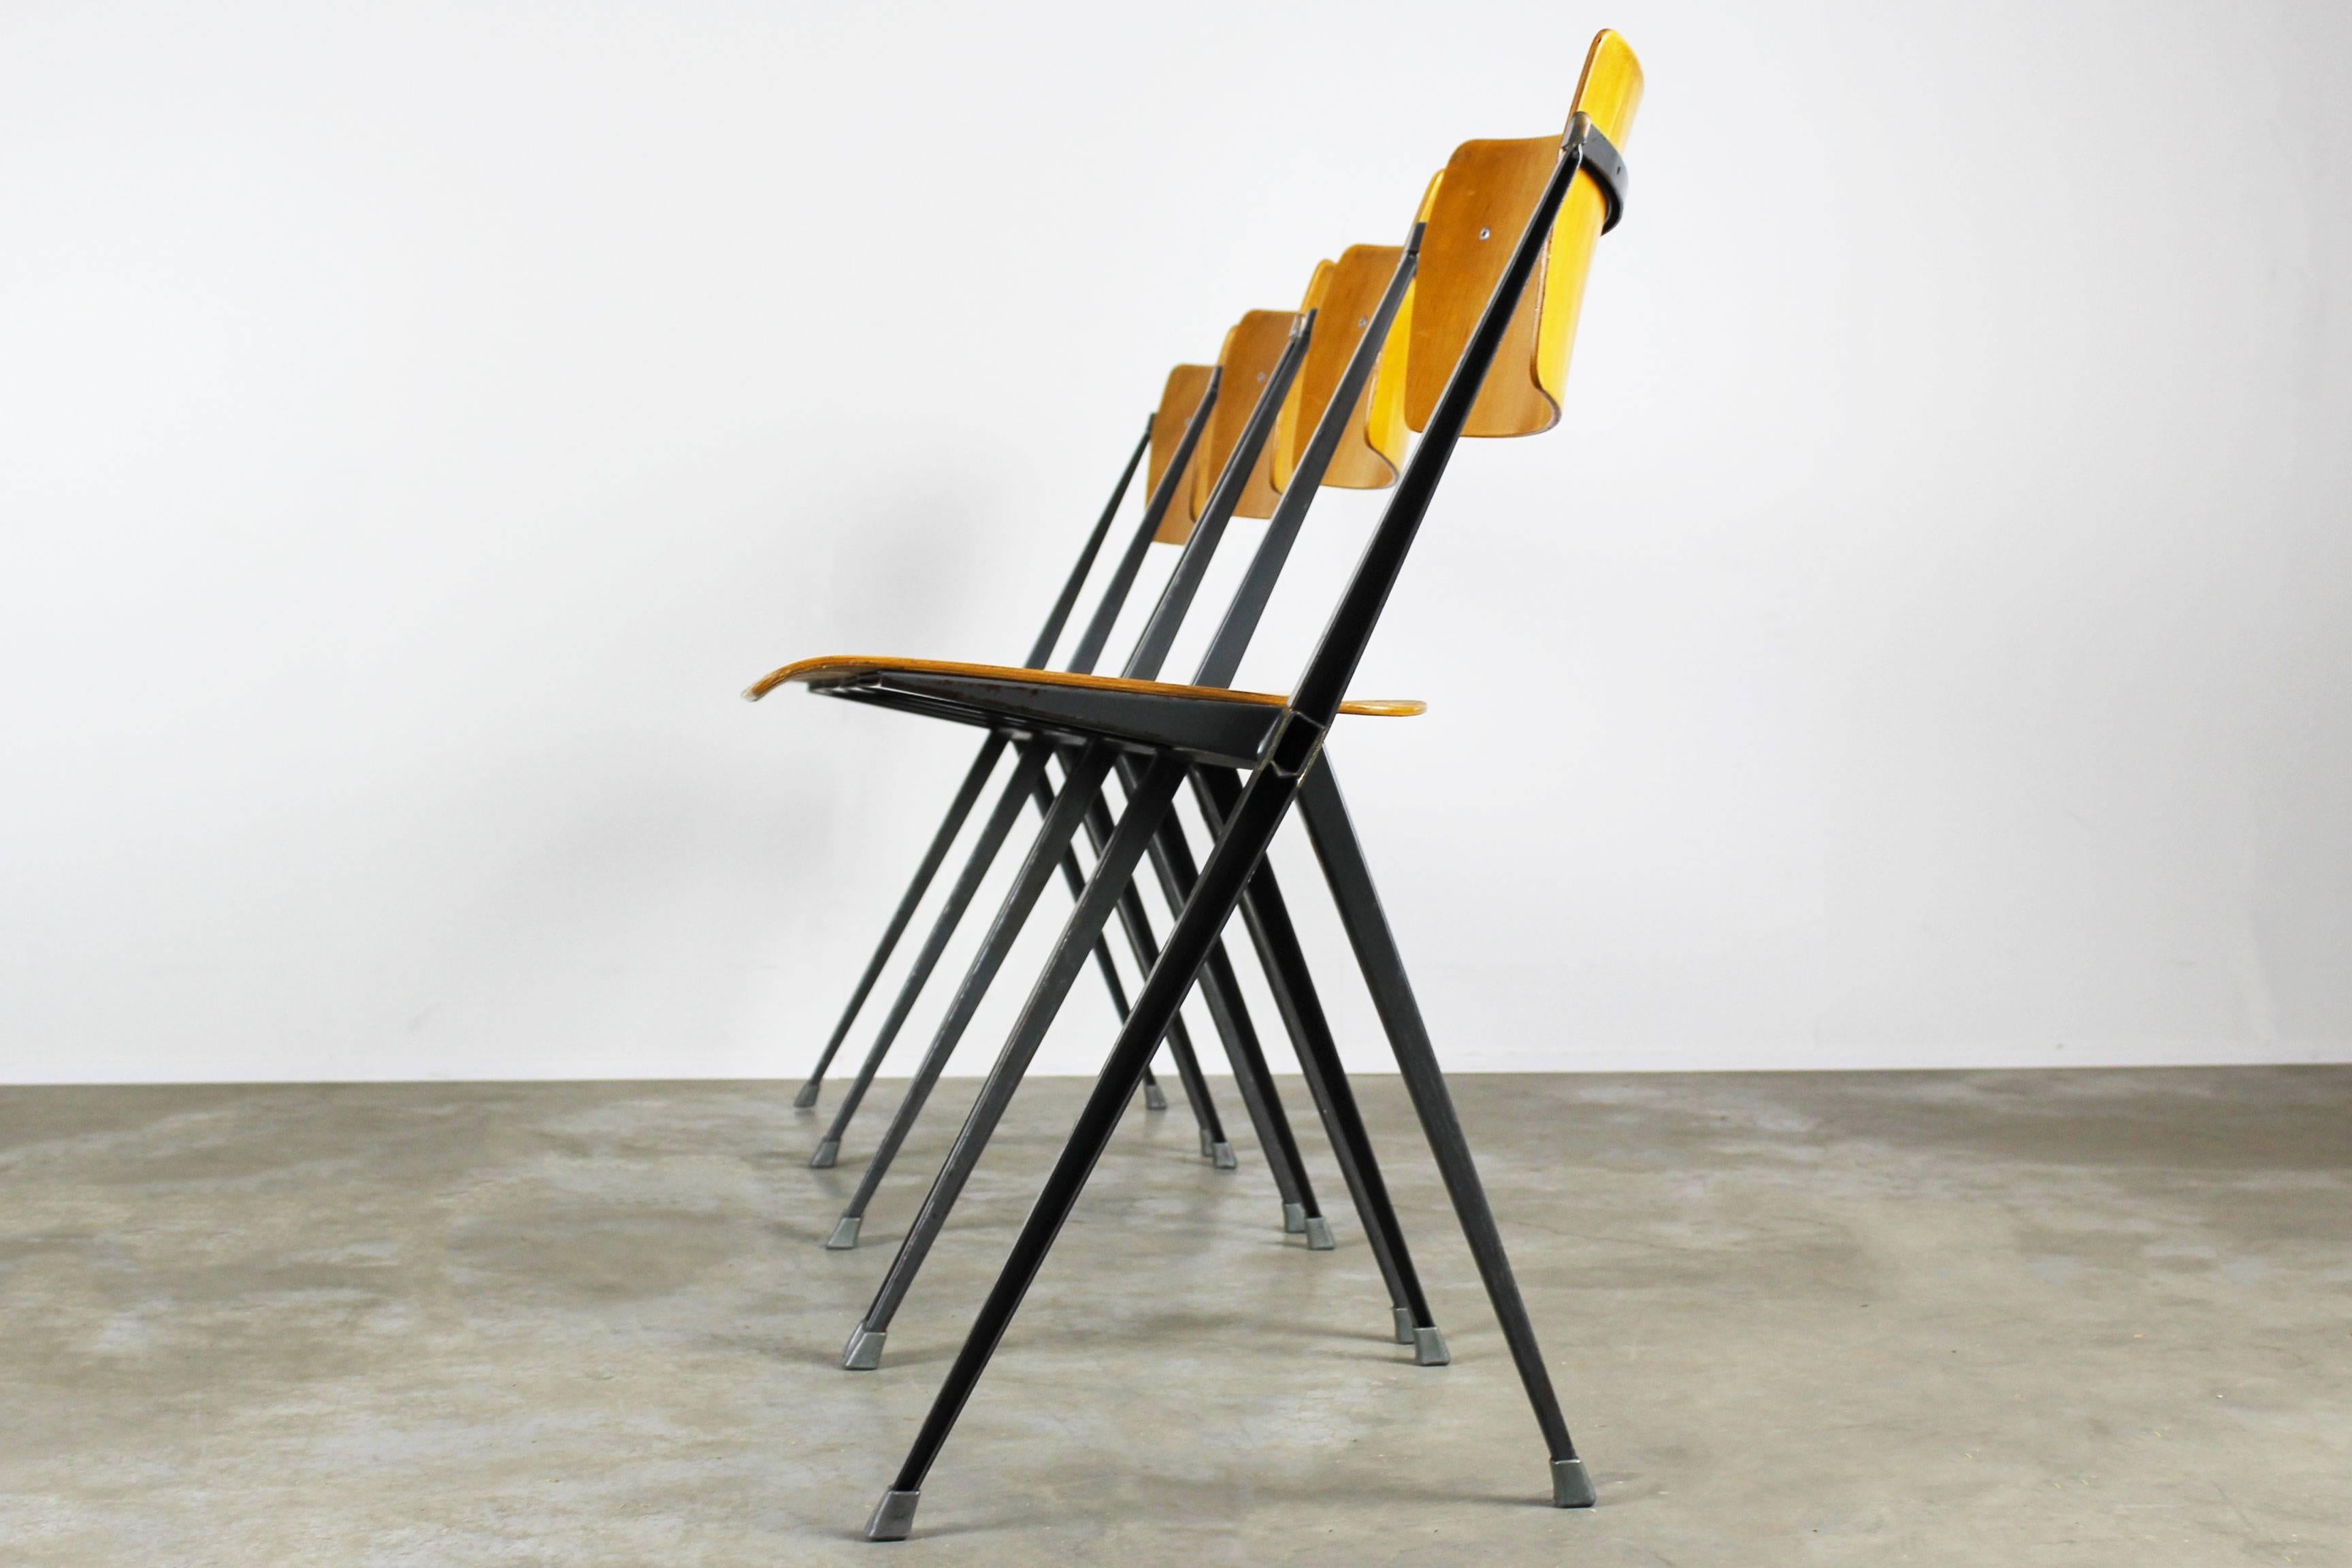 Dutch Set of Four Pyramid Chairs Designed by Wim Rietveld for Ahrend de Cirkel, 1963 For Sale